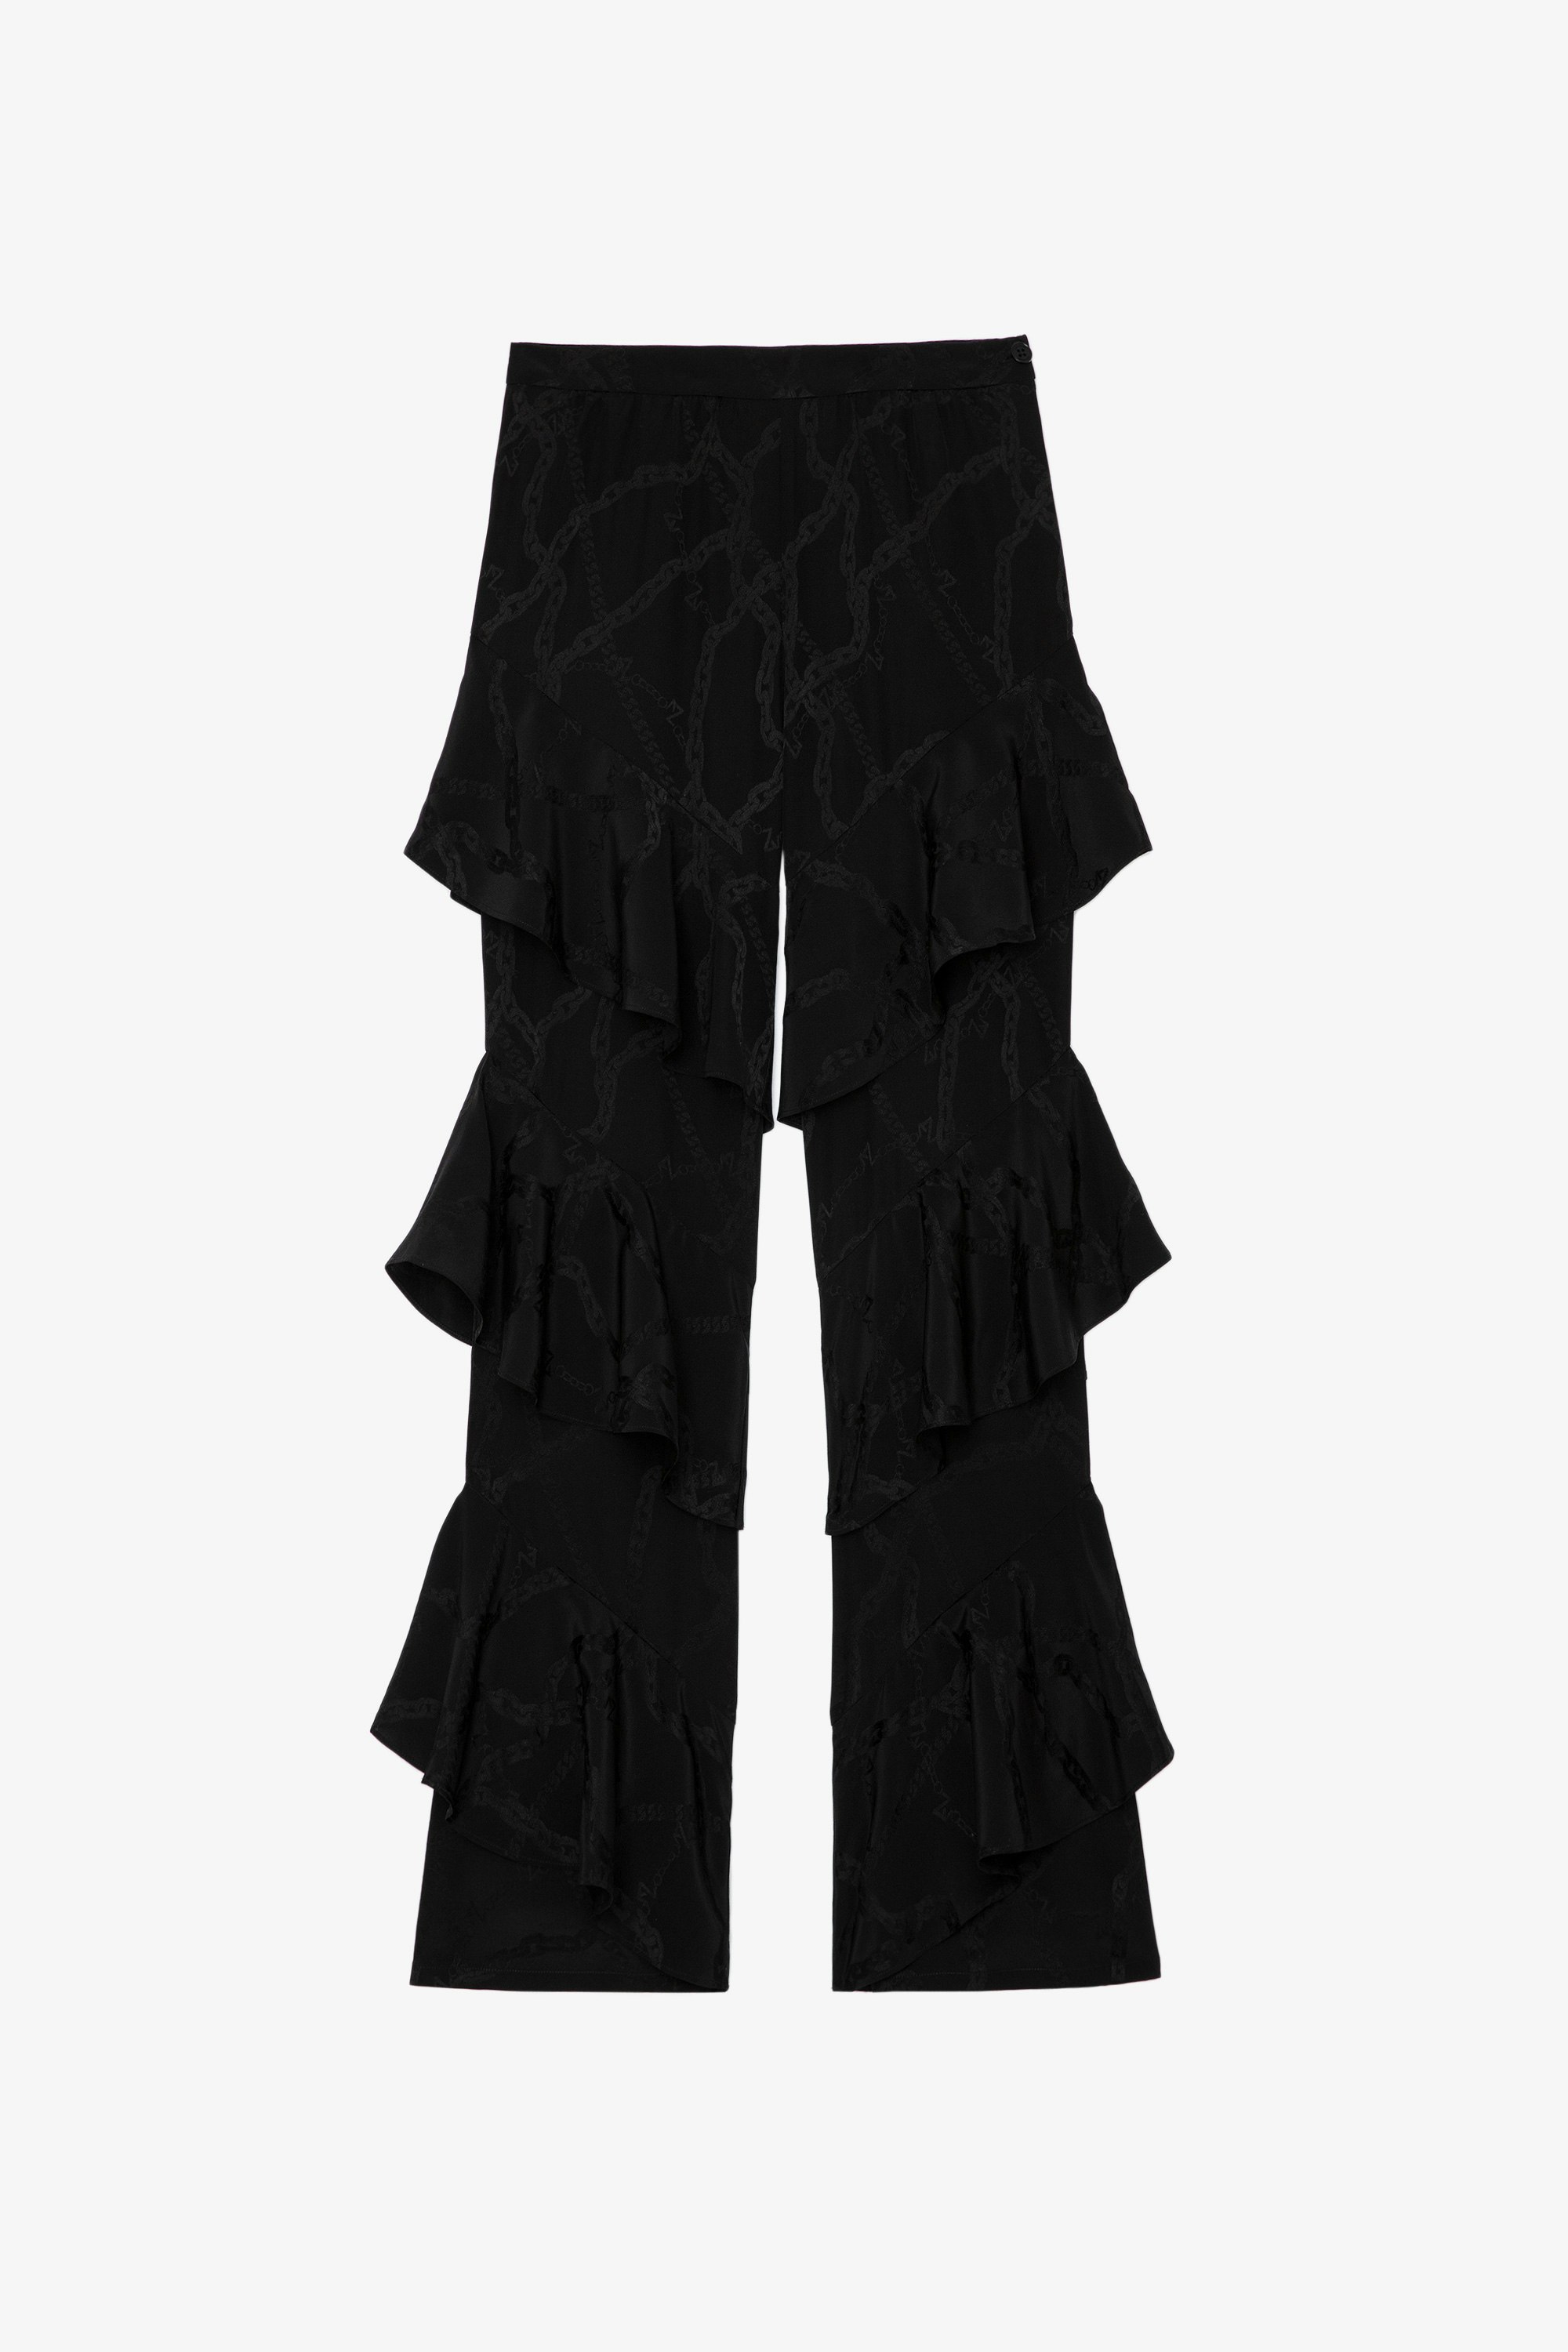 Poum Chains シルク パンツ Women’s black silk trousers with ruffles and jacquard ZV chains 